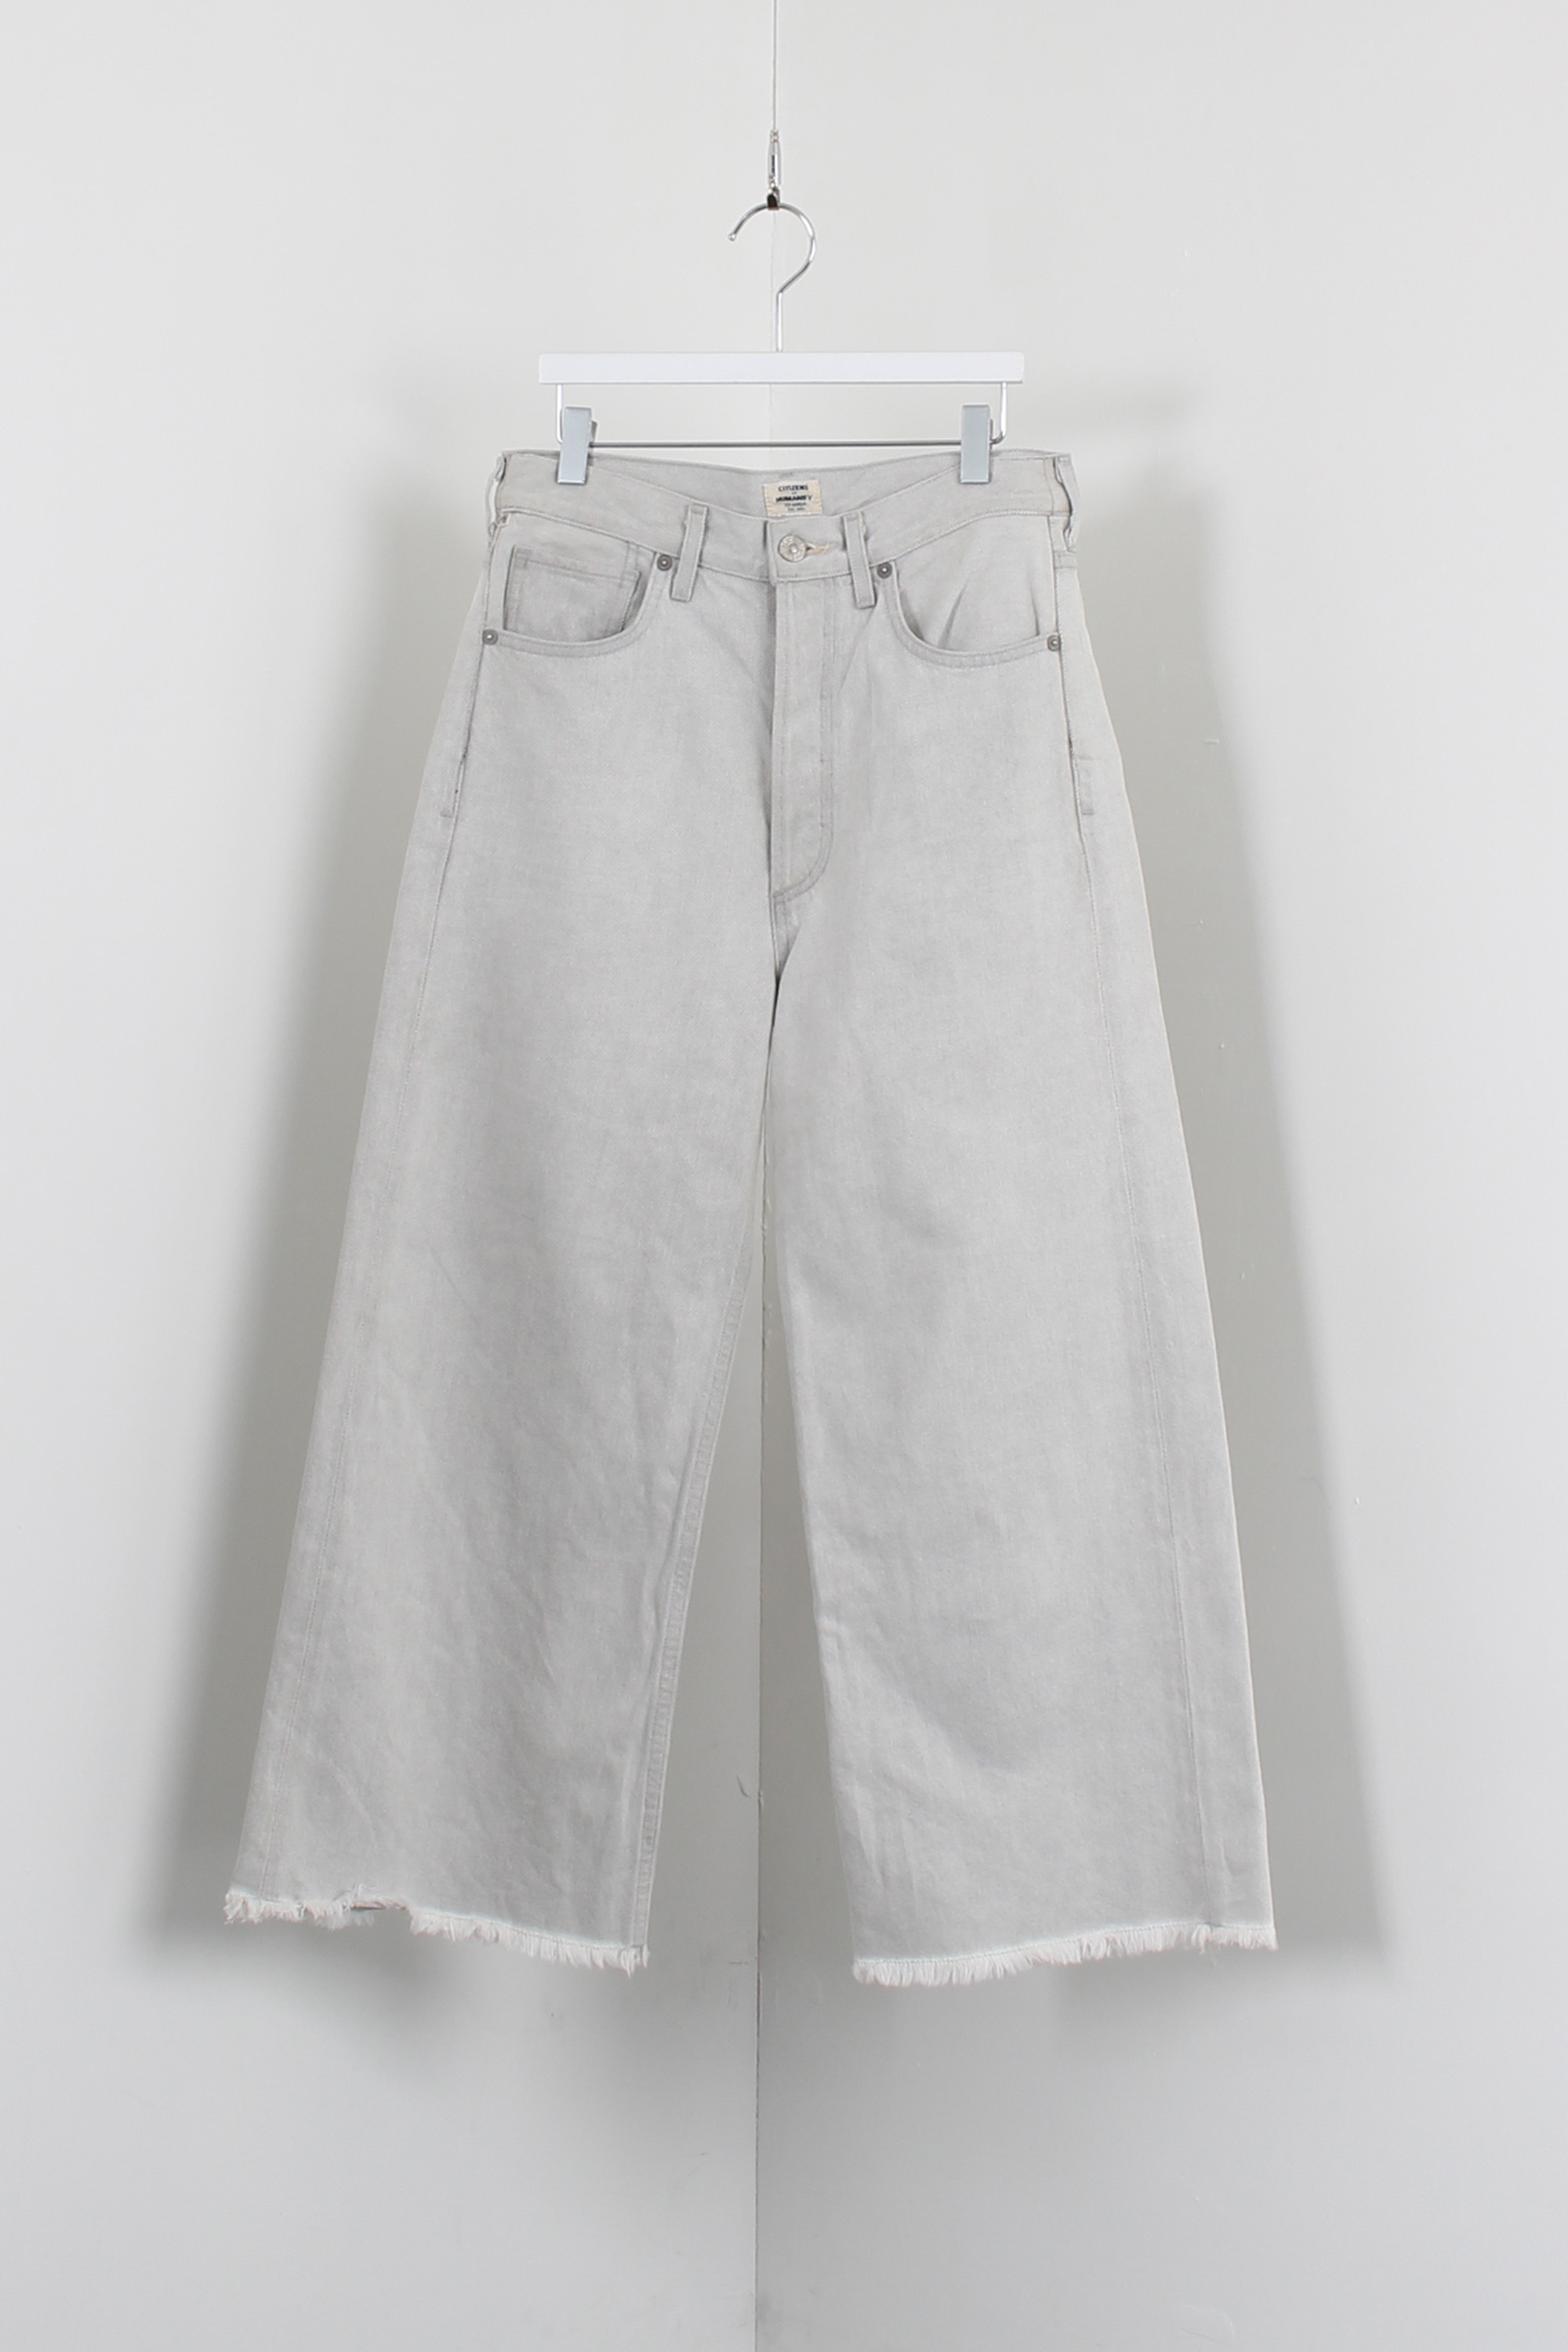 CITIZENS of HUMANITY cropped jean